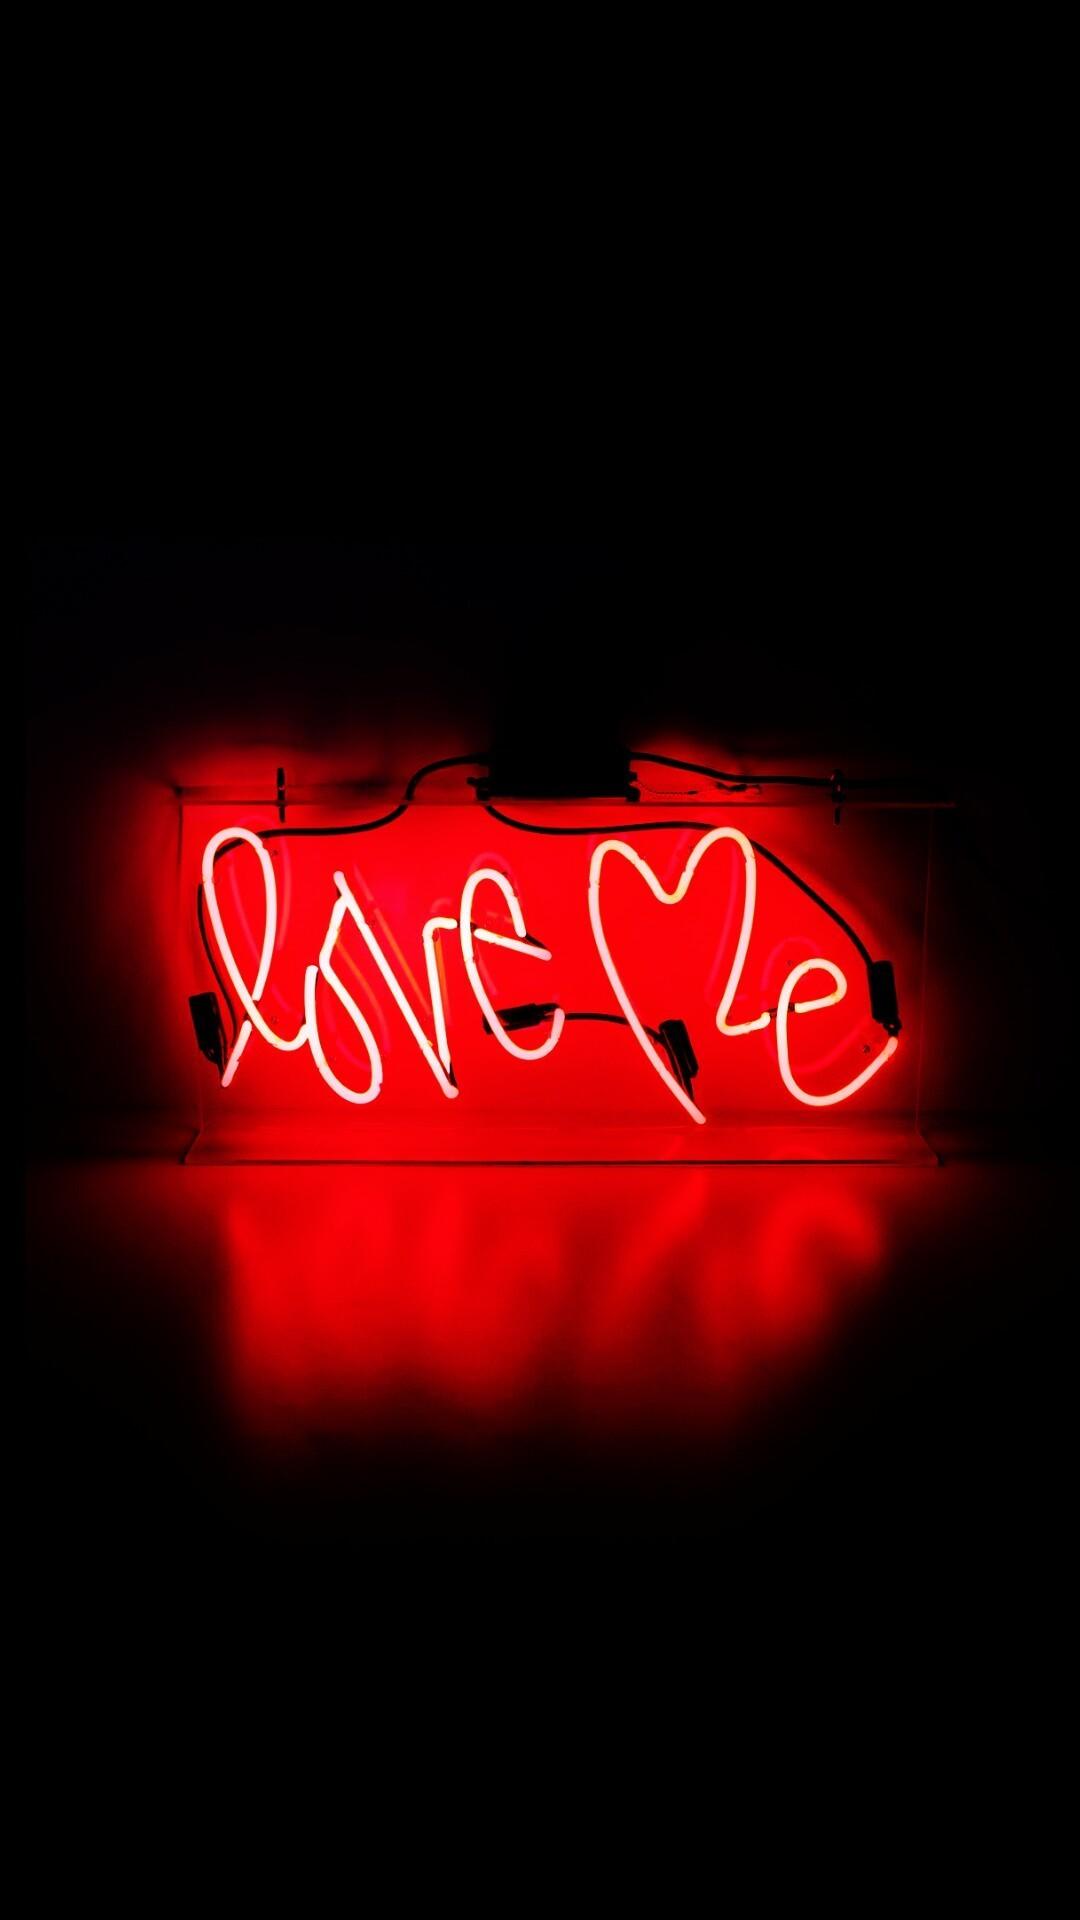 A neon sign that says love me - Neon red, light red